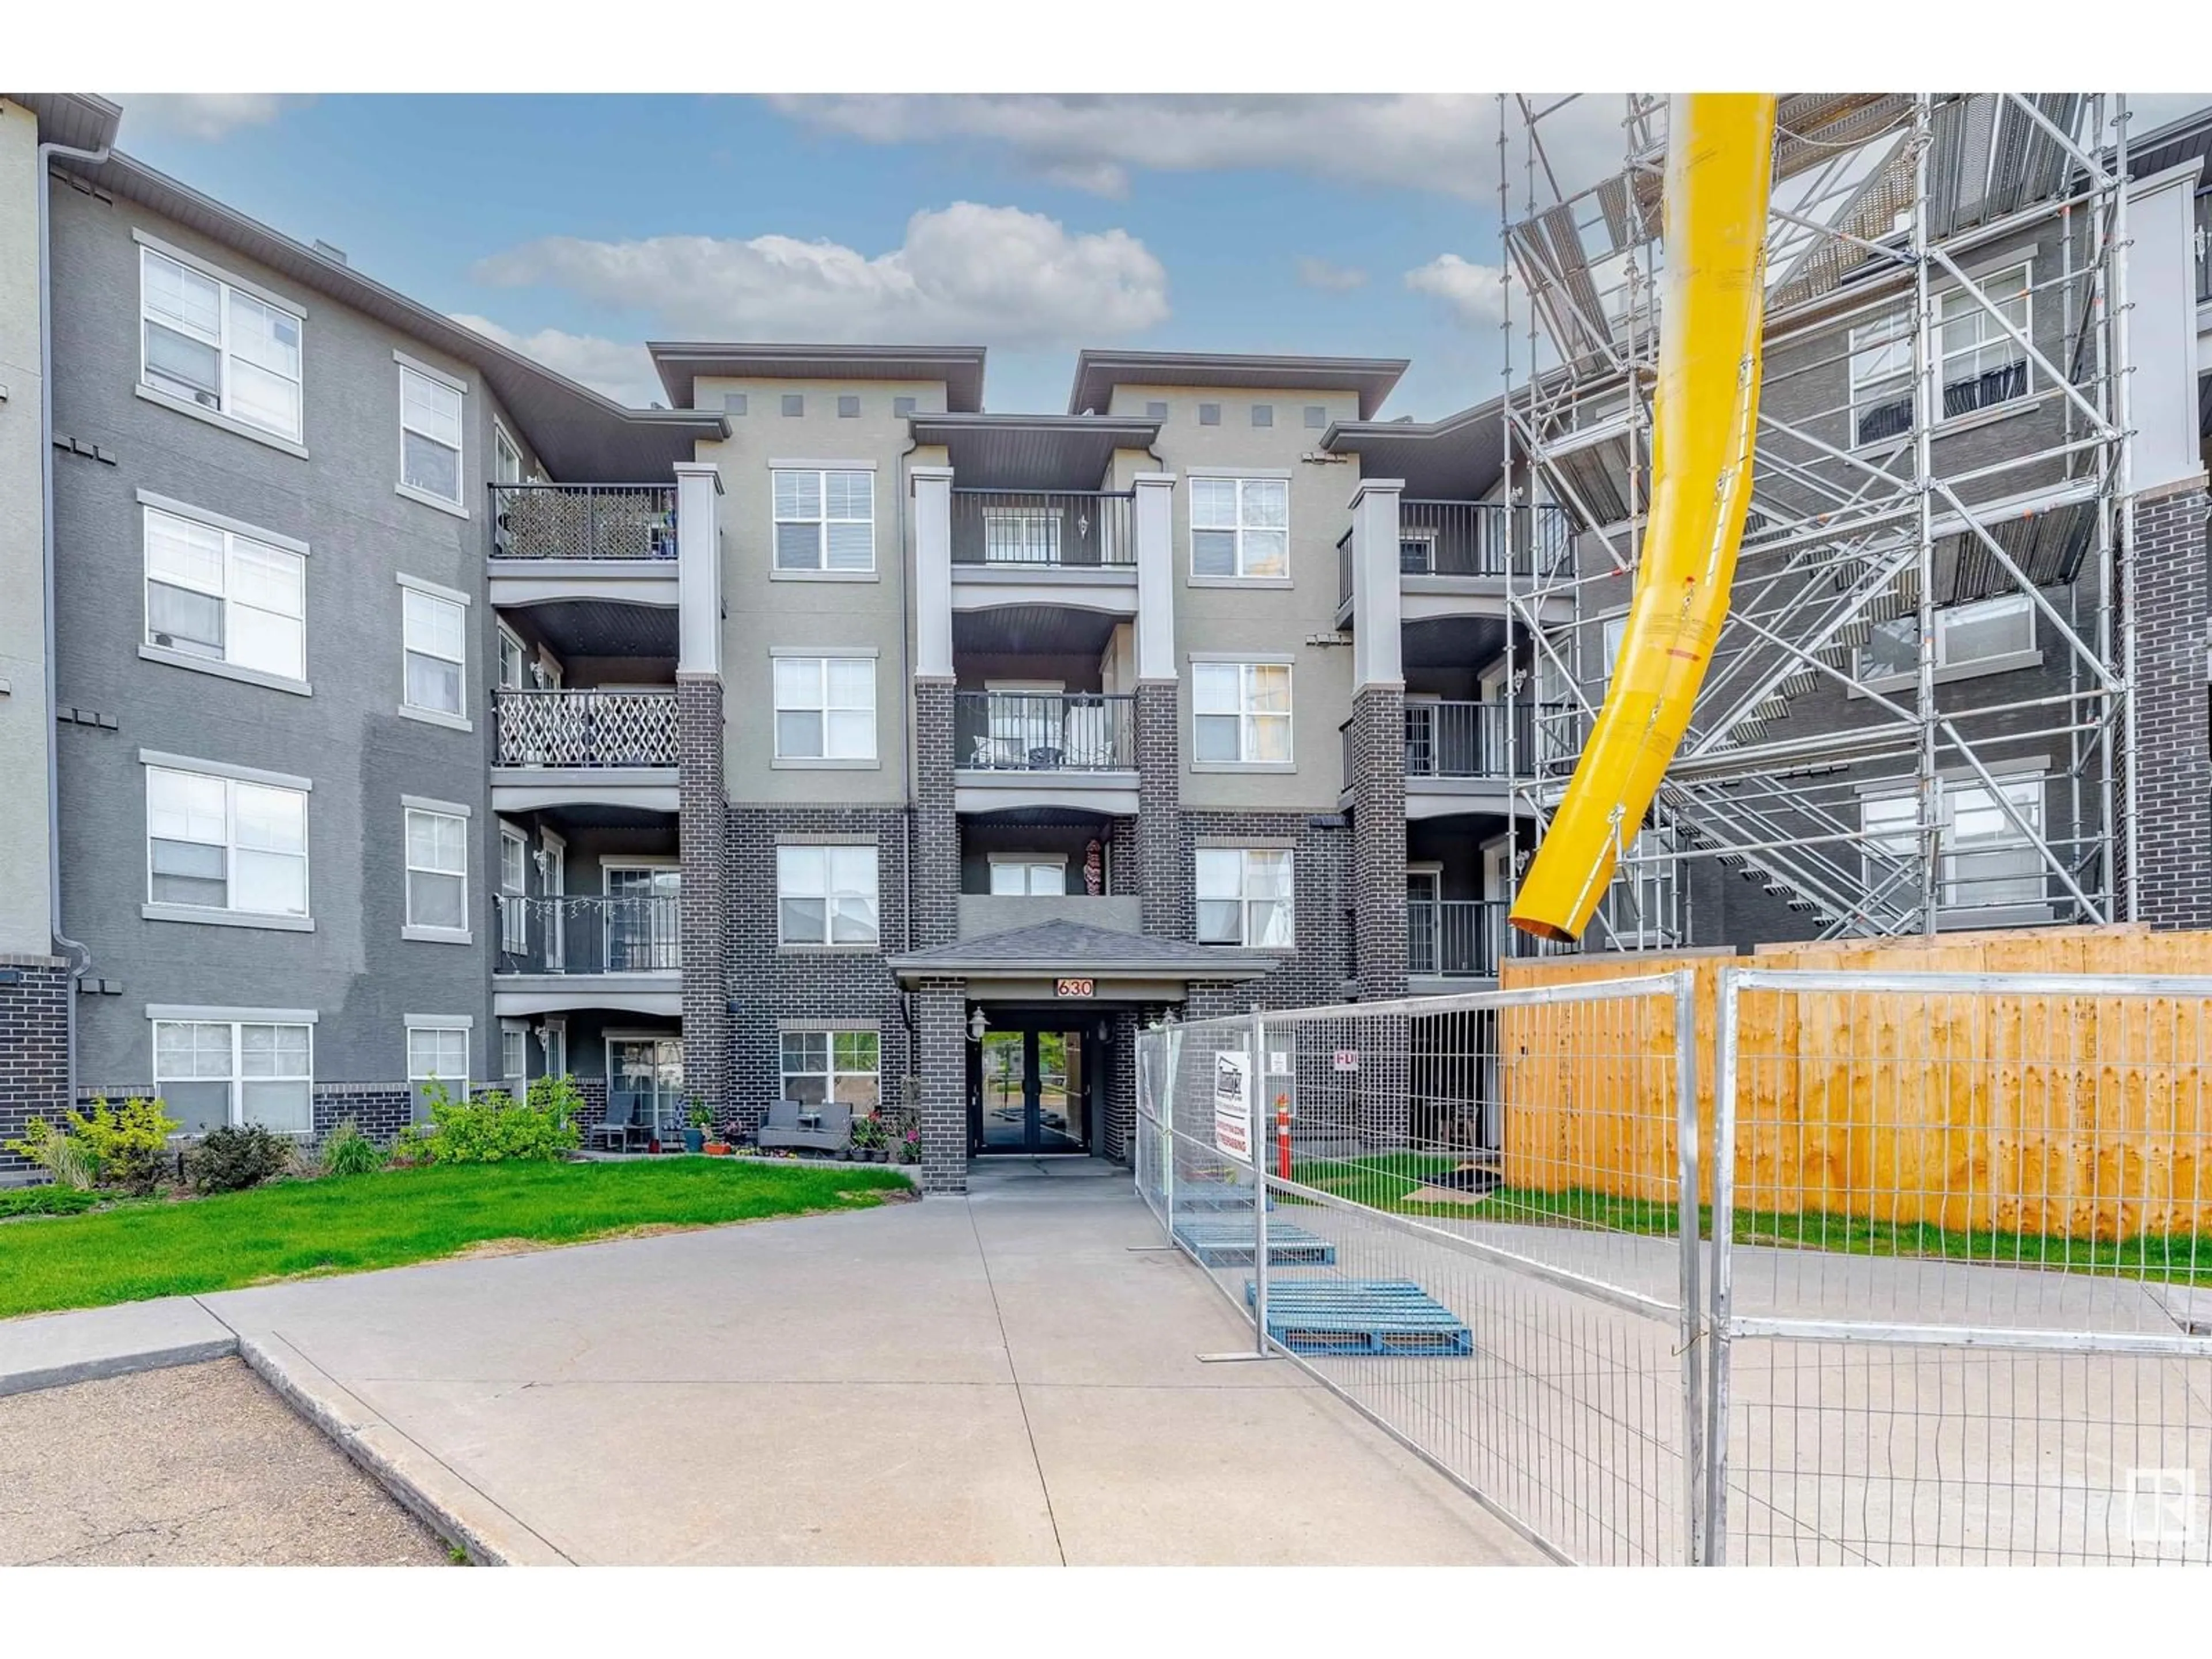 A pic from exterior of the house or condo for #407 630 MCALLISTER LO SW, Edmonton Alberta T6W1N3